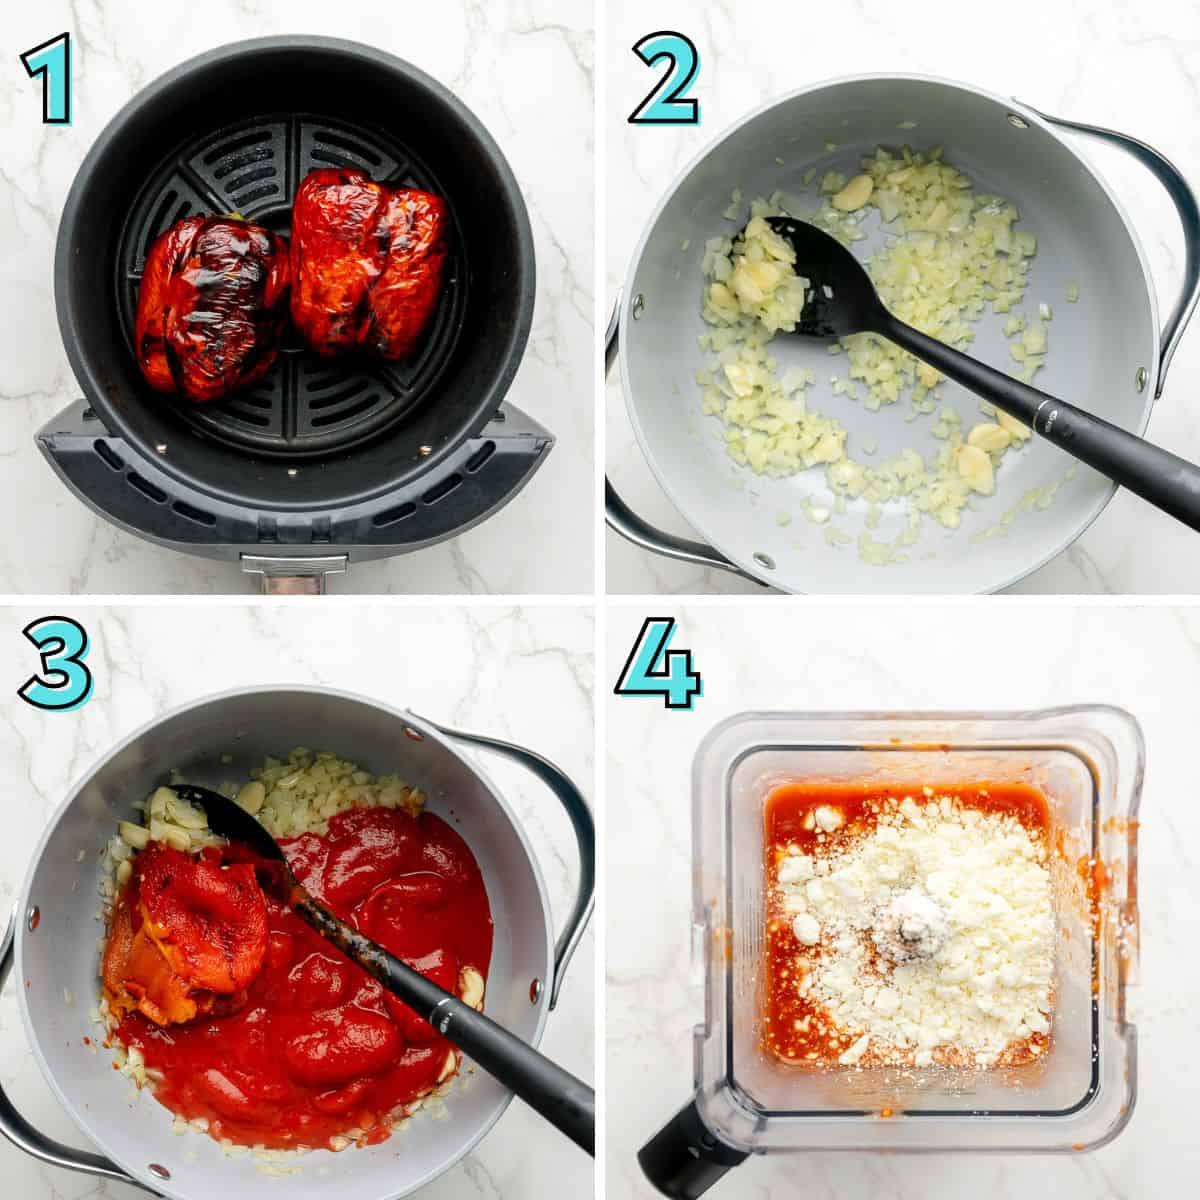 Step-by-step recipe instructions, in a collage.